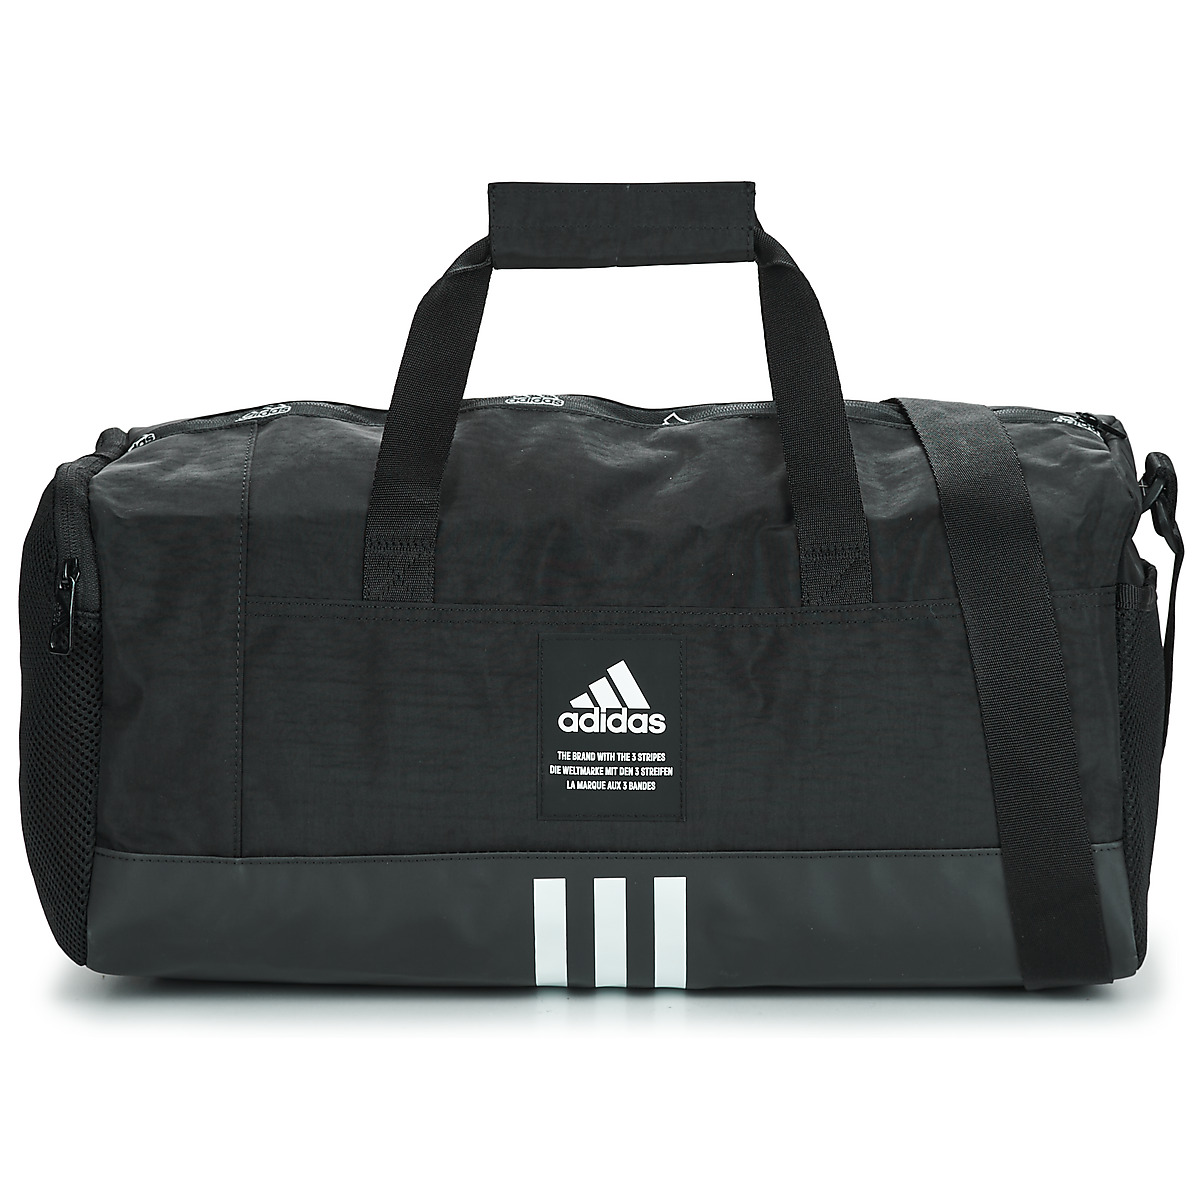 adidas Performance 4ATHLTS DUF S 25887099 1200 A